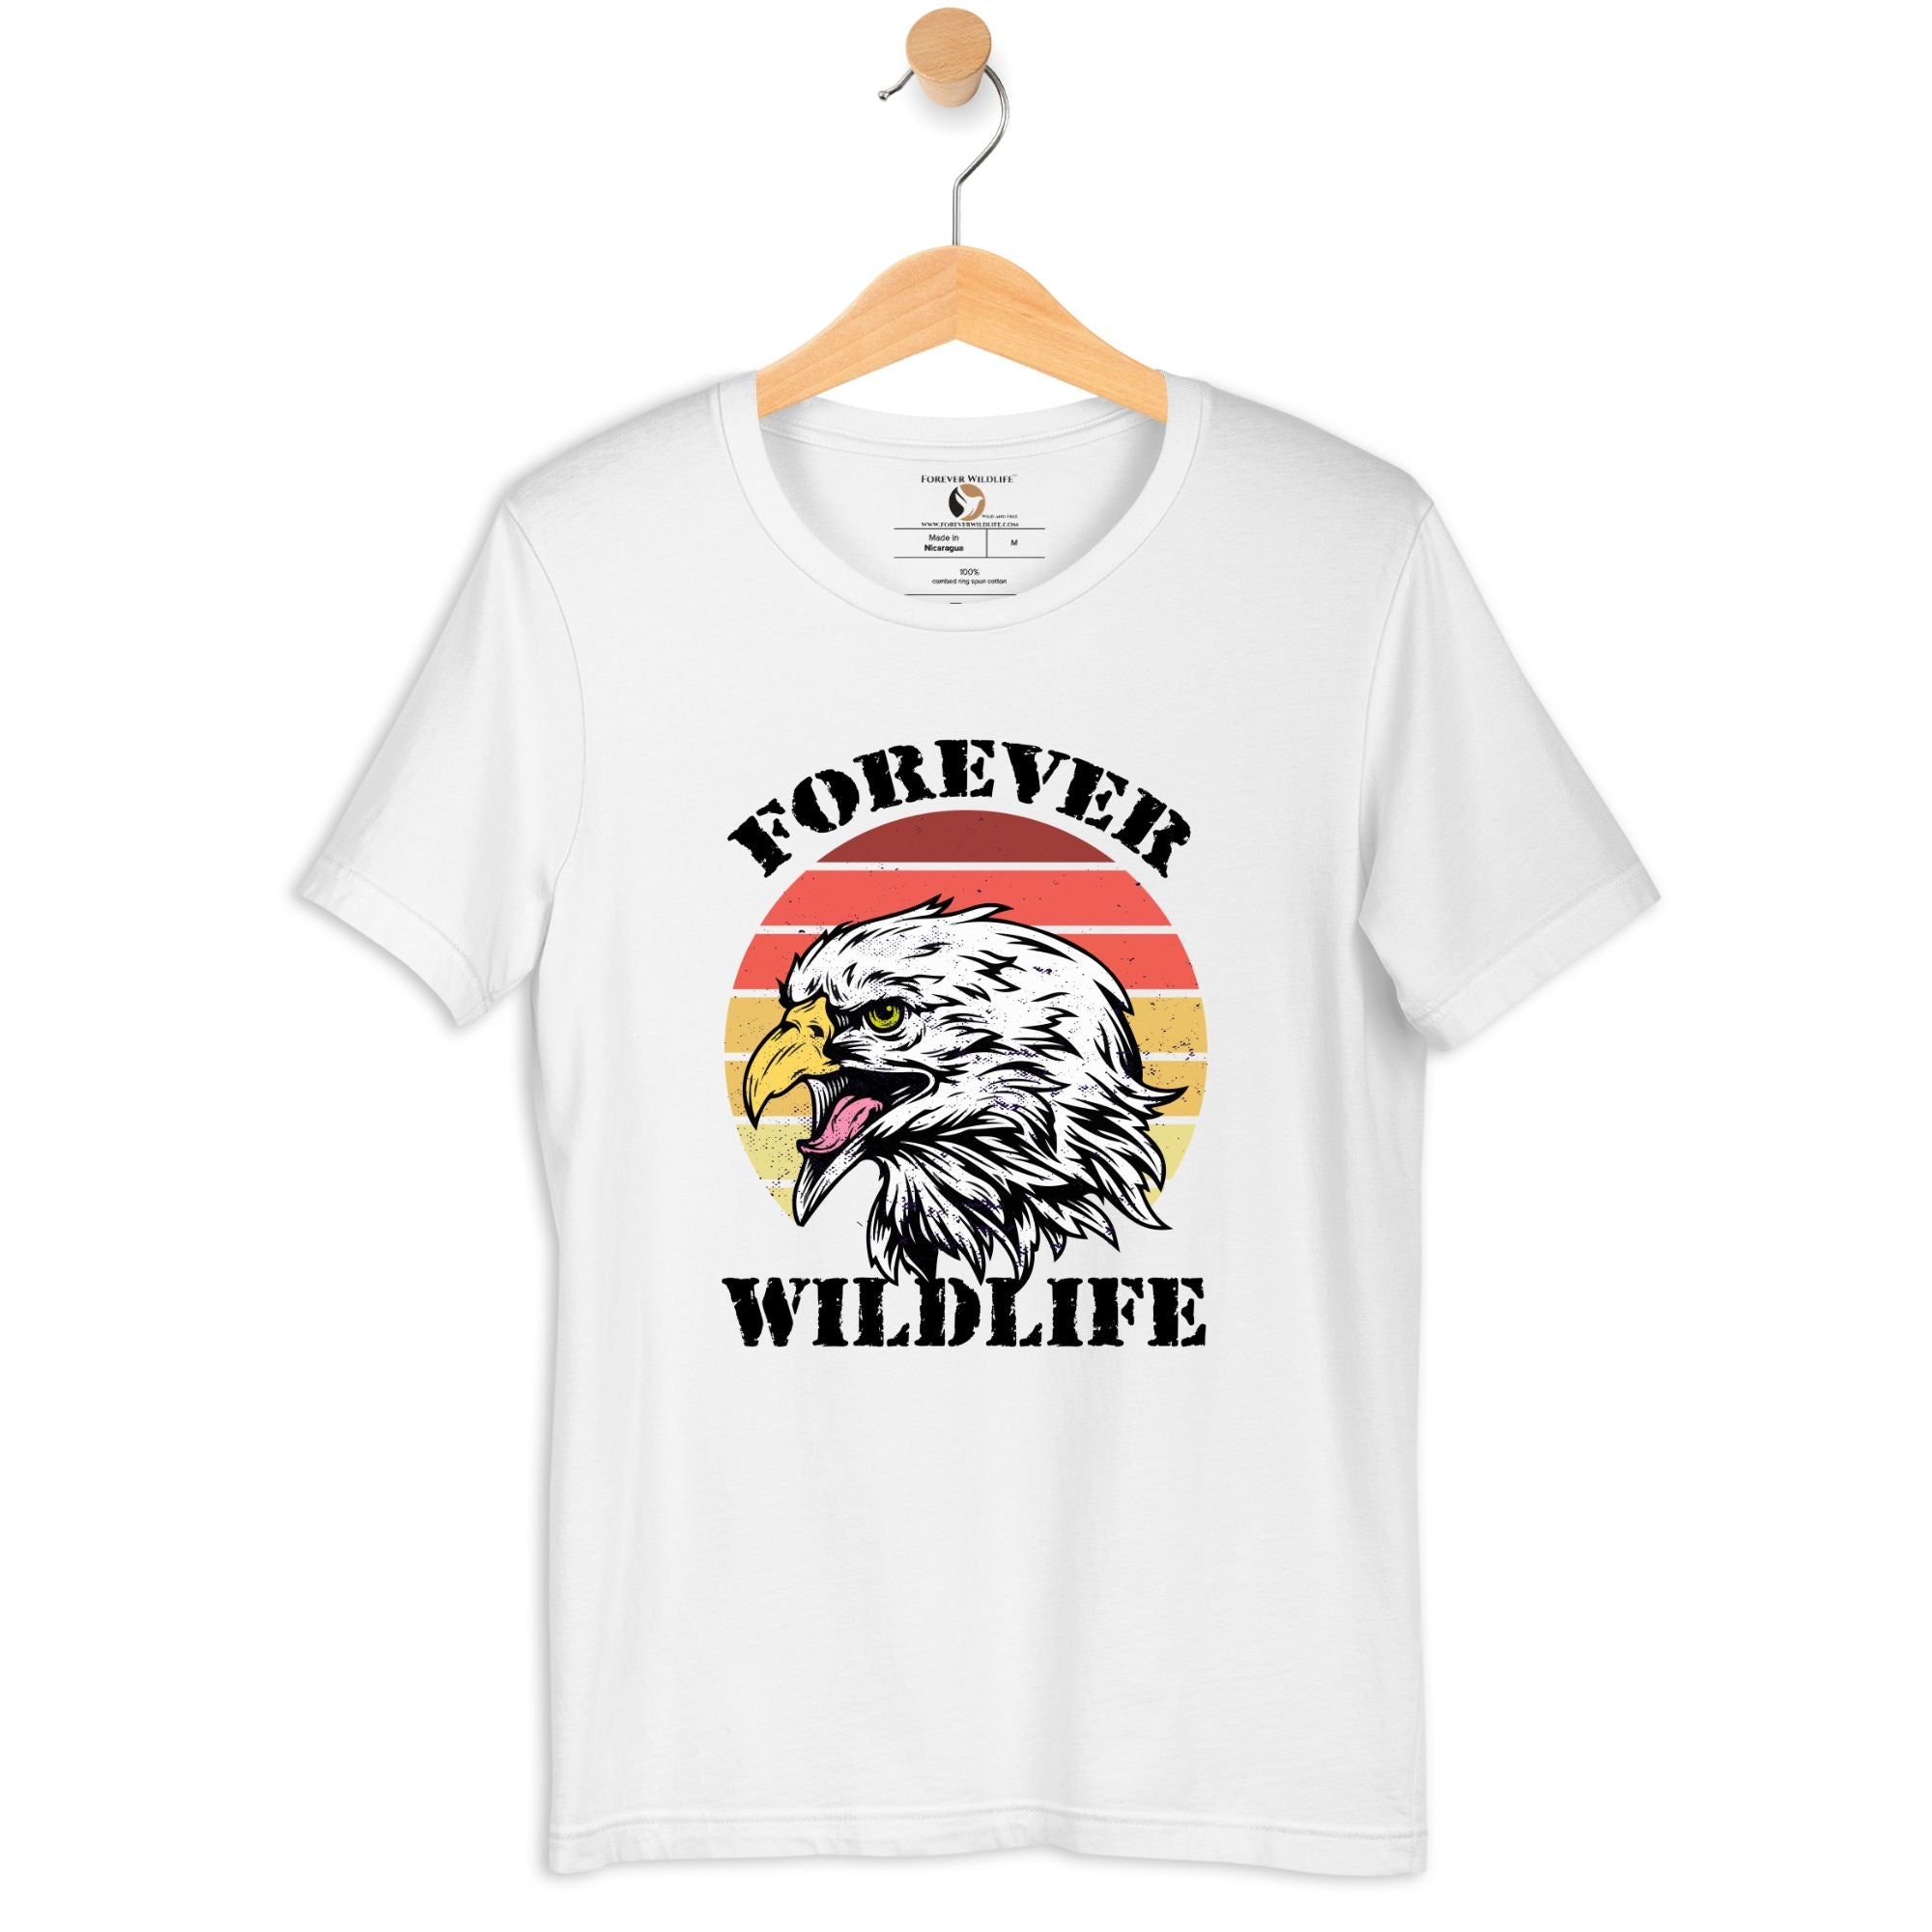 Eagle T-Shirt in White – Premium Wildlife T-Shirt Design, Eagle Shirts and Wildlife Clothing from Forever Wildlife